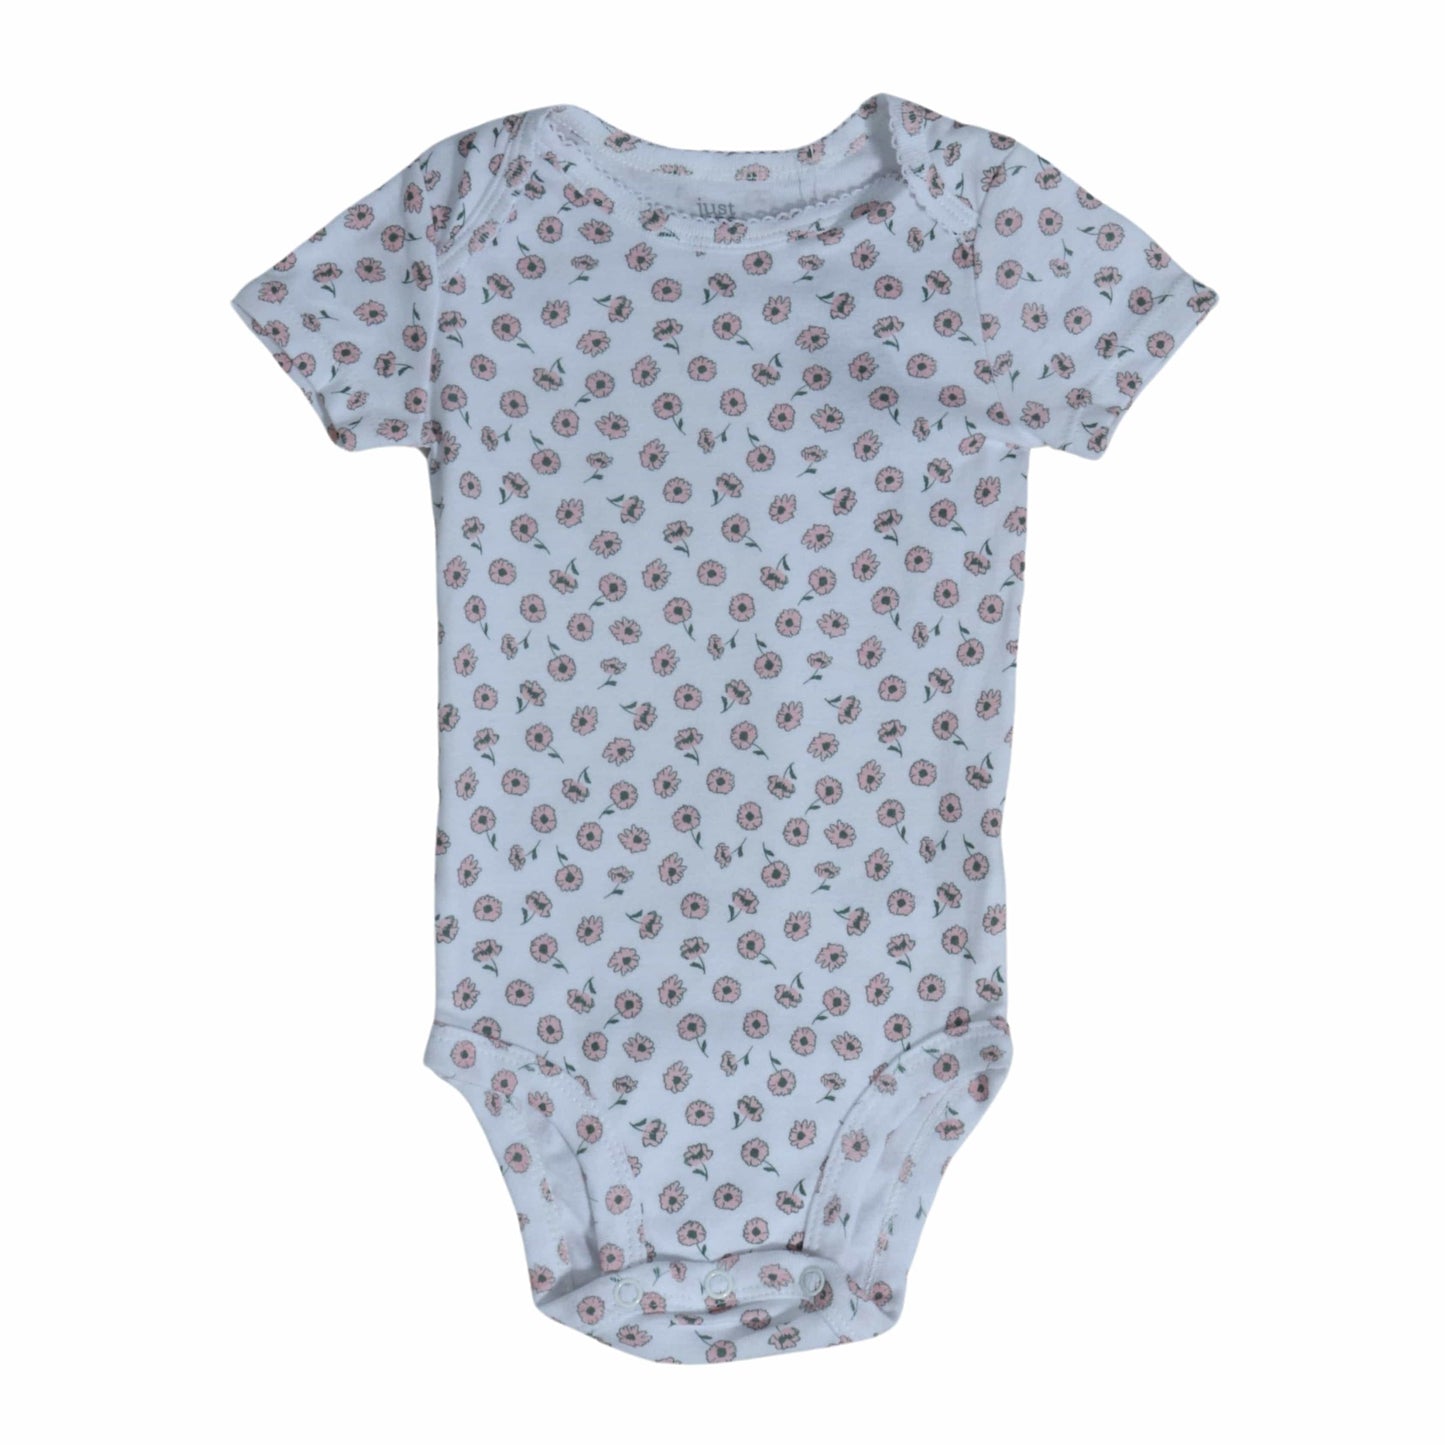 JUST ONE YOU Baby Girl 6 Month / White JUST ONE YOU - BABY - Printed All Over Bodysuits